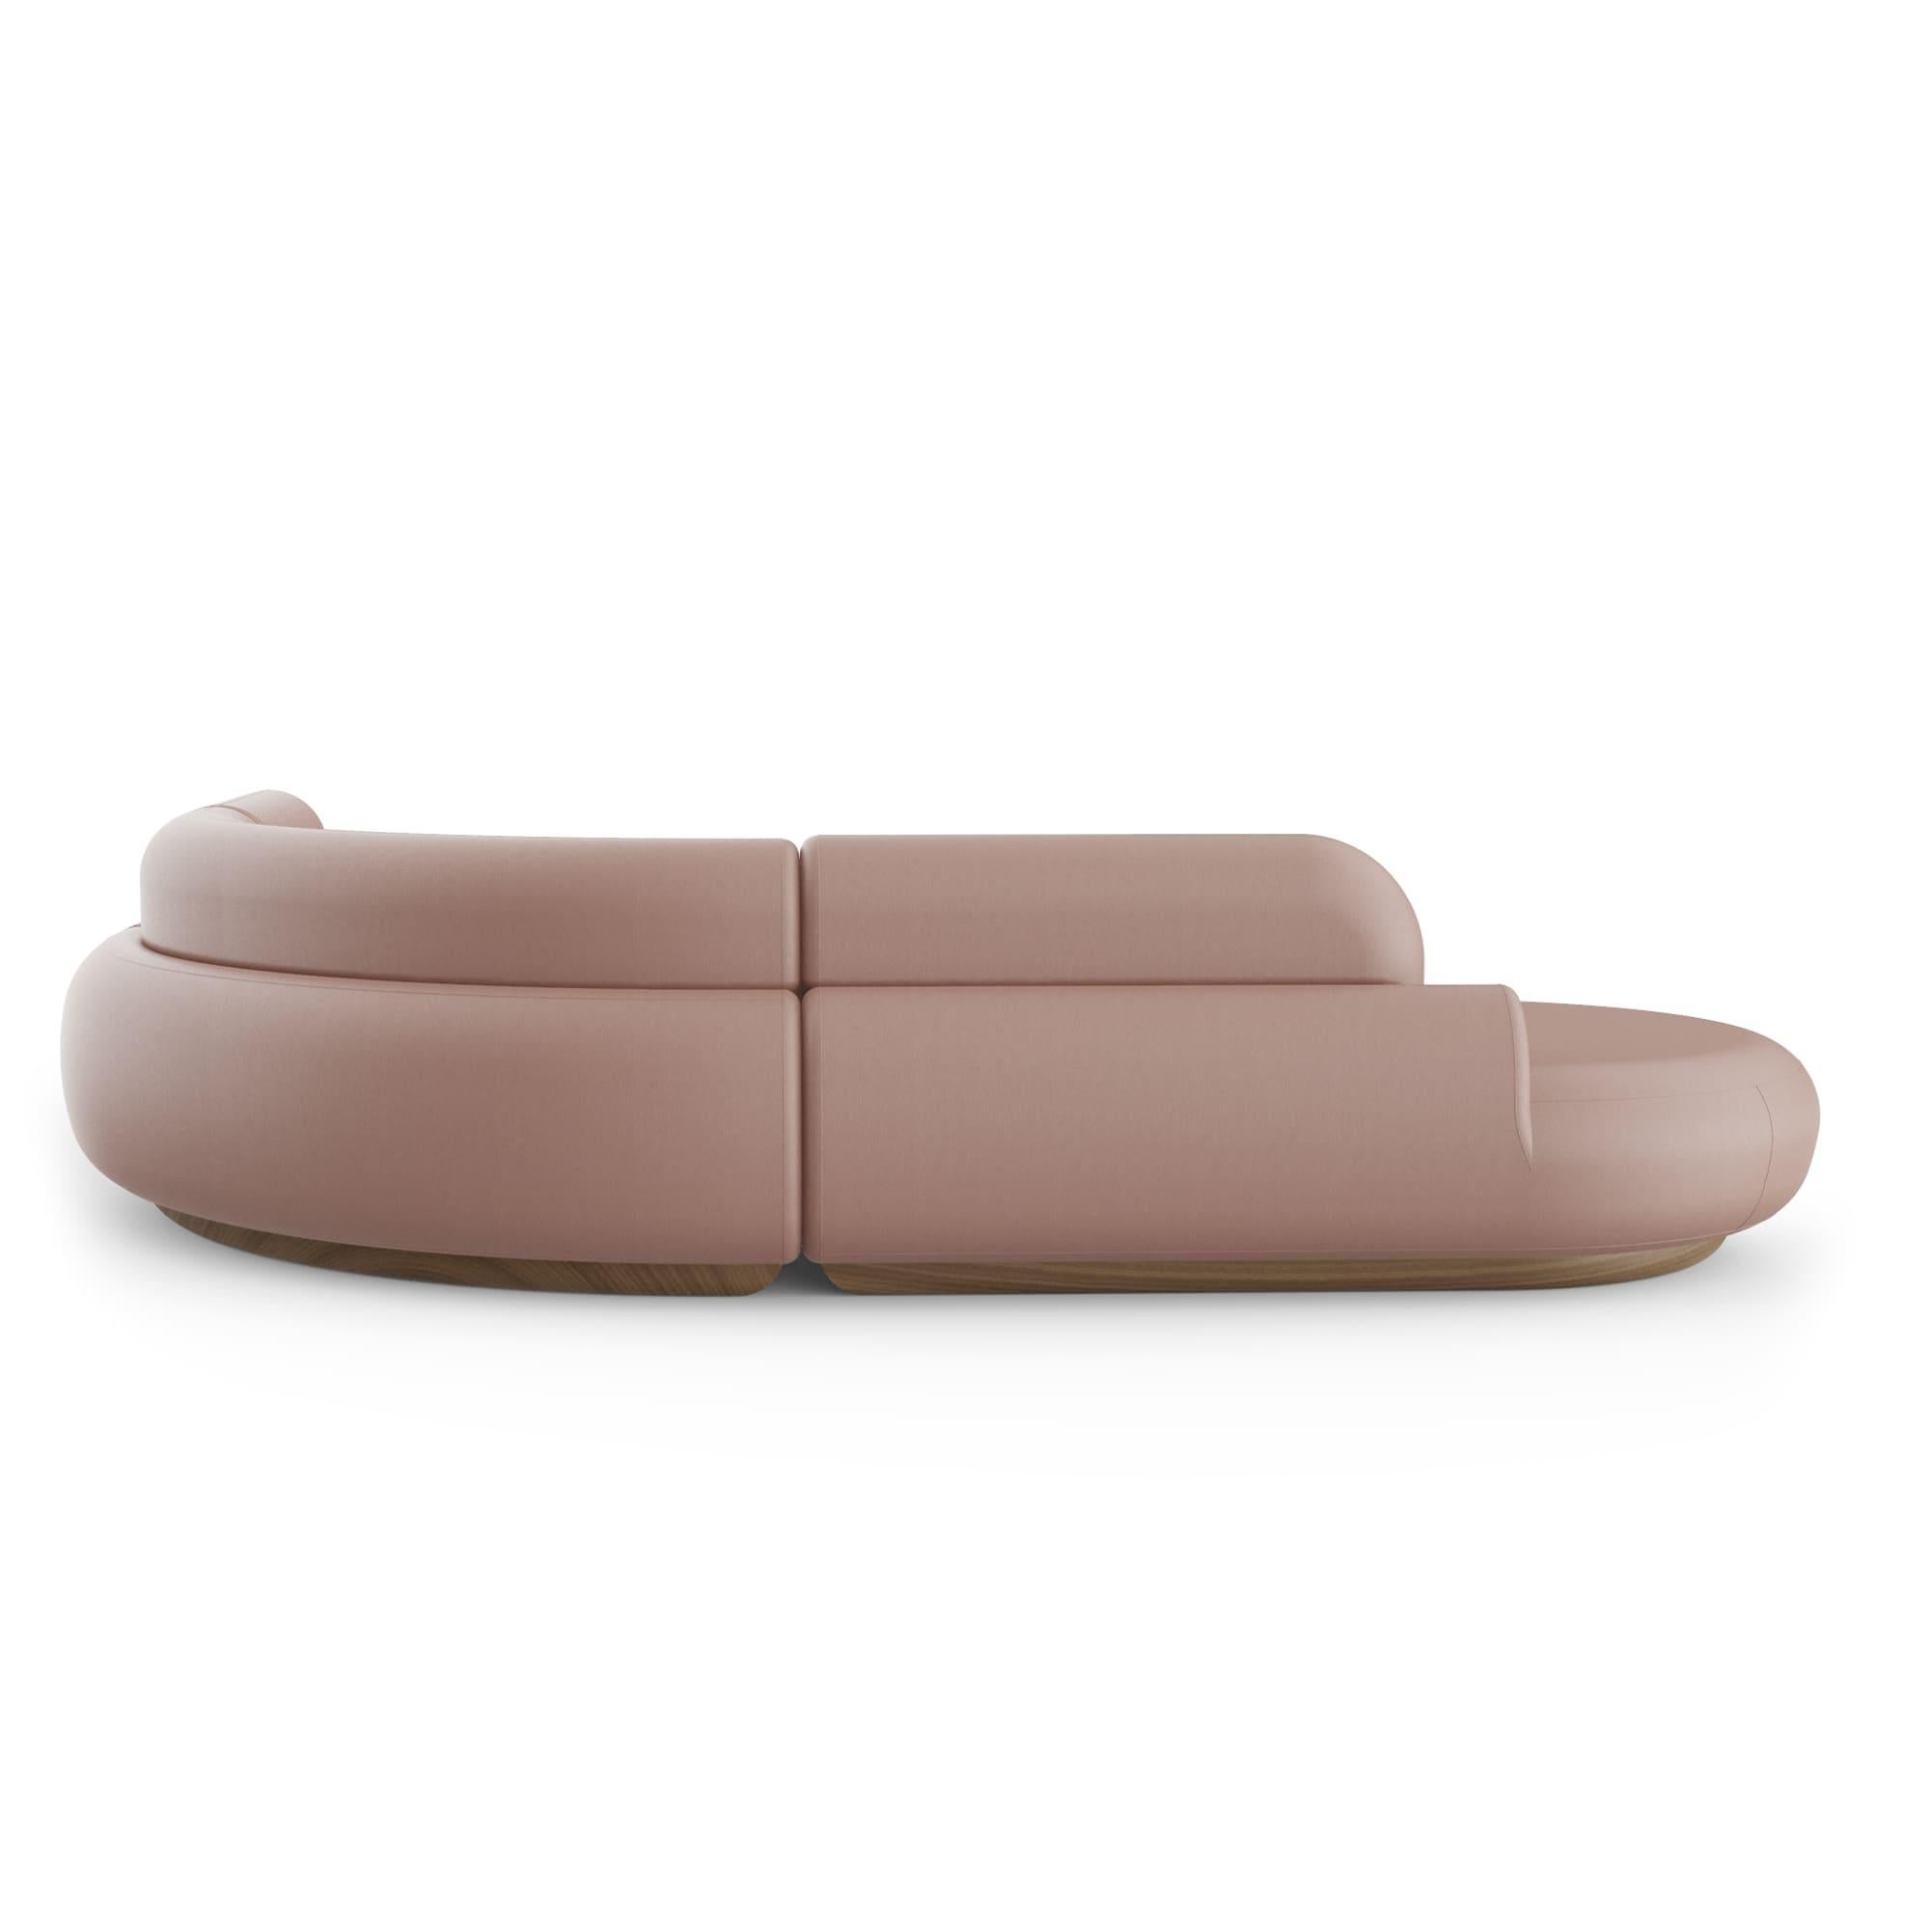 Naked sofa by Dooq
Dimensions: W 312 x D 332 x H 78 cm
Seat height 40 cm
Materials: Base beechwood
Upholstery synthetic leather
Also available in smooth velvet  

Naked sofa reveals sculptural and organic shape meant to embrace the user and